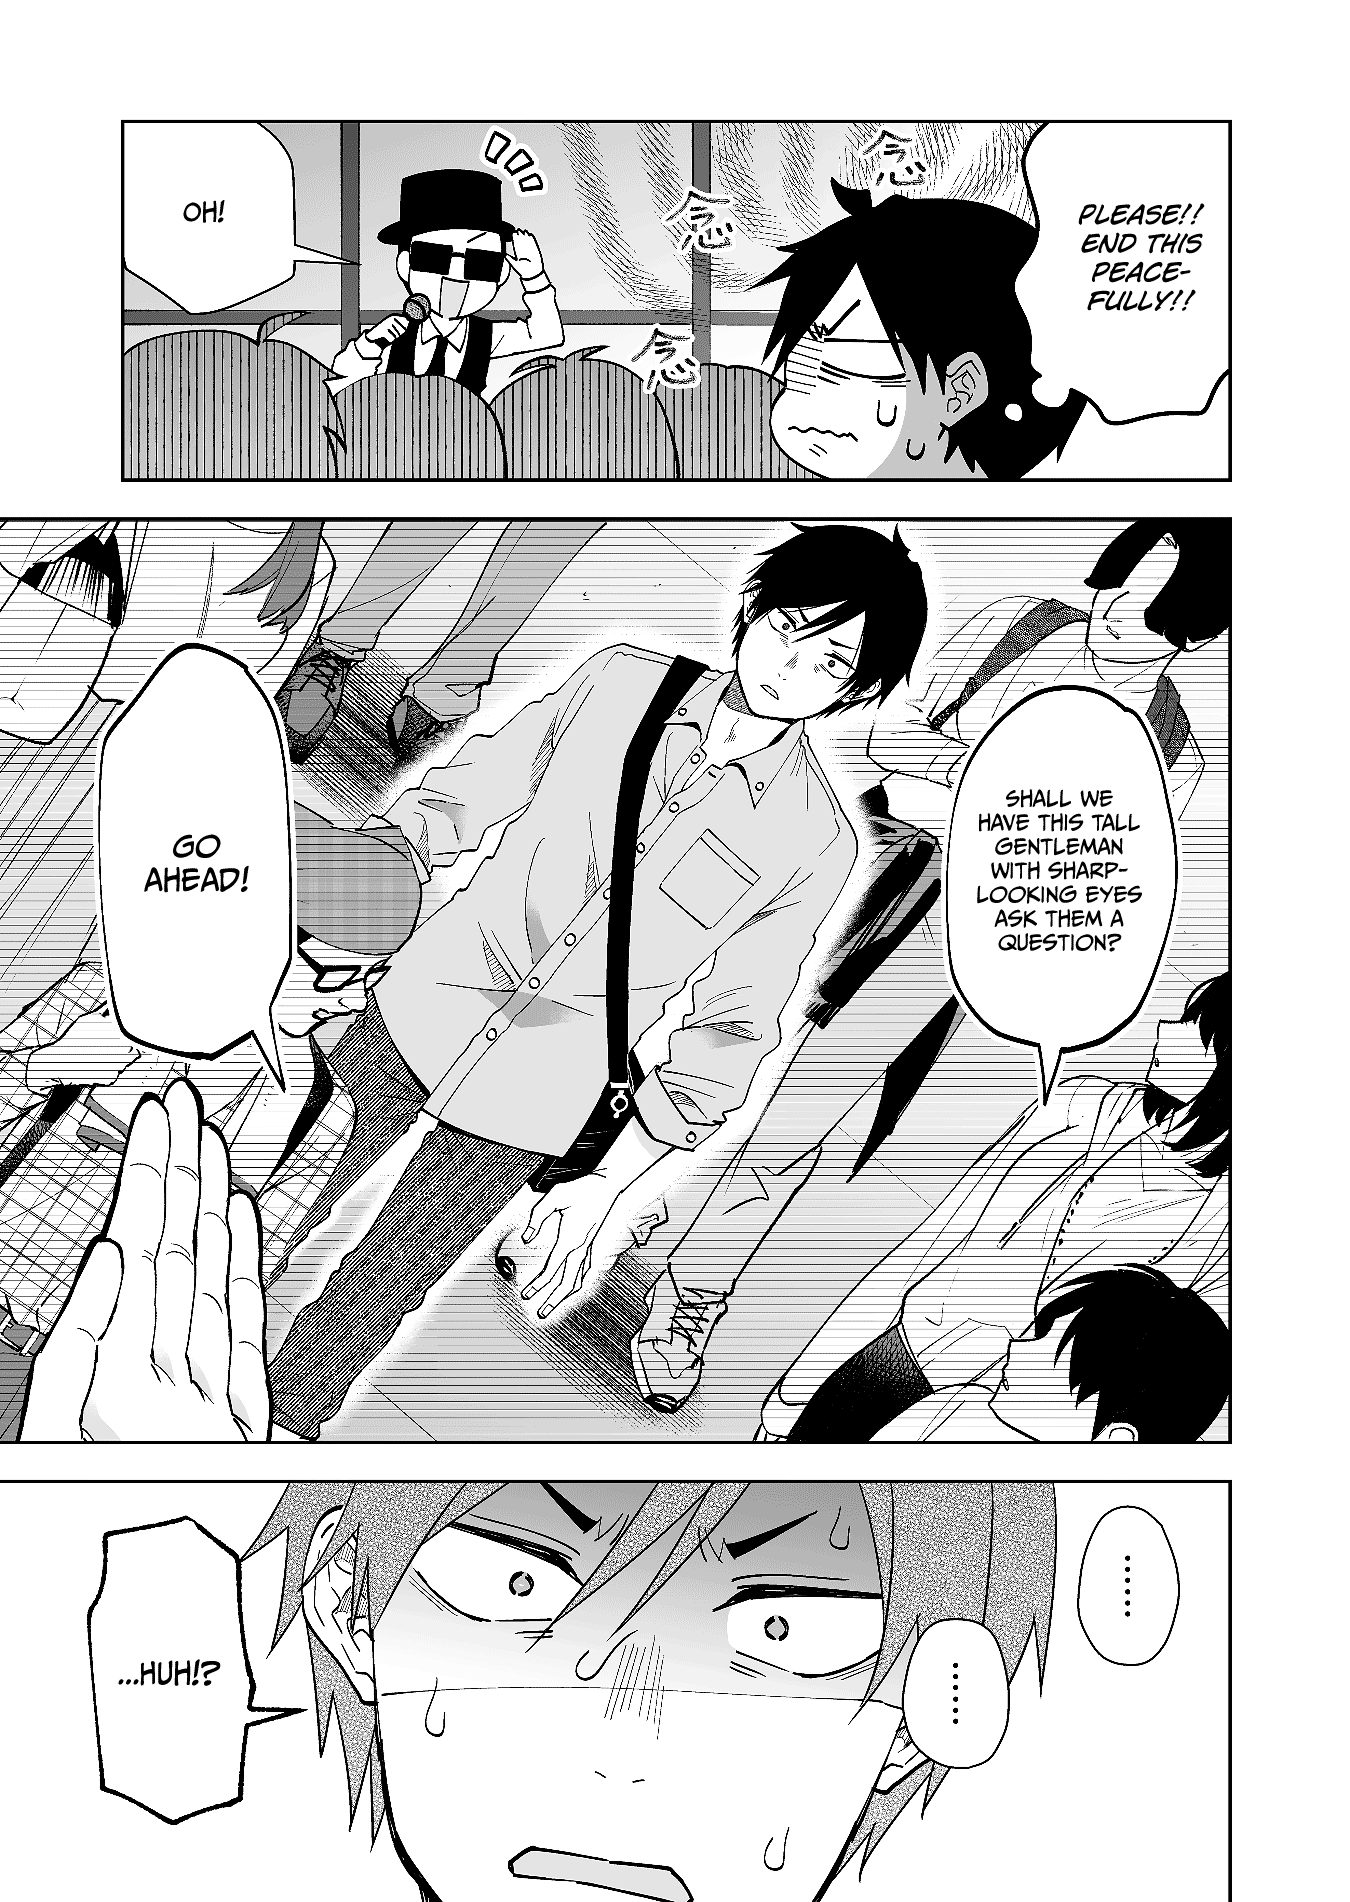 I Fell In Love, So I Tried Livestreaming - 68 page 9-6e8aaa49